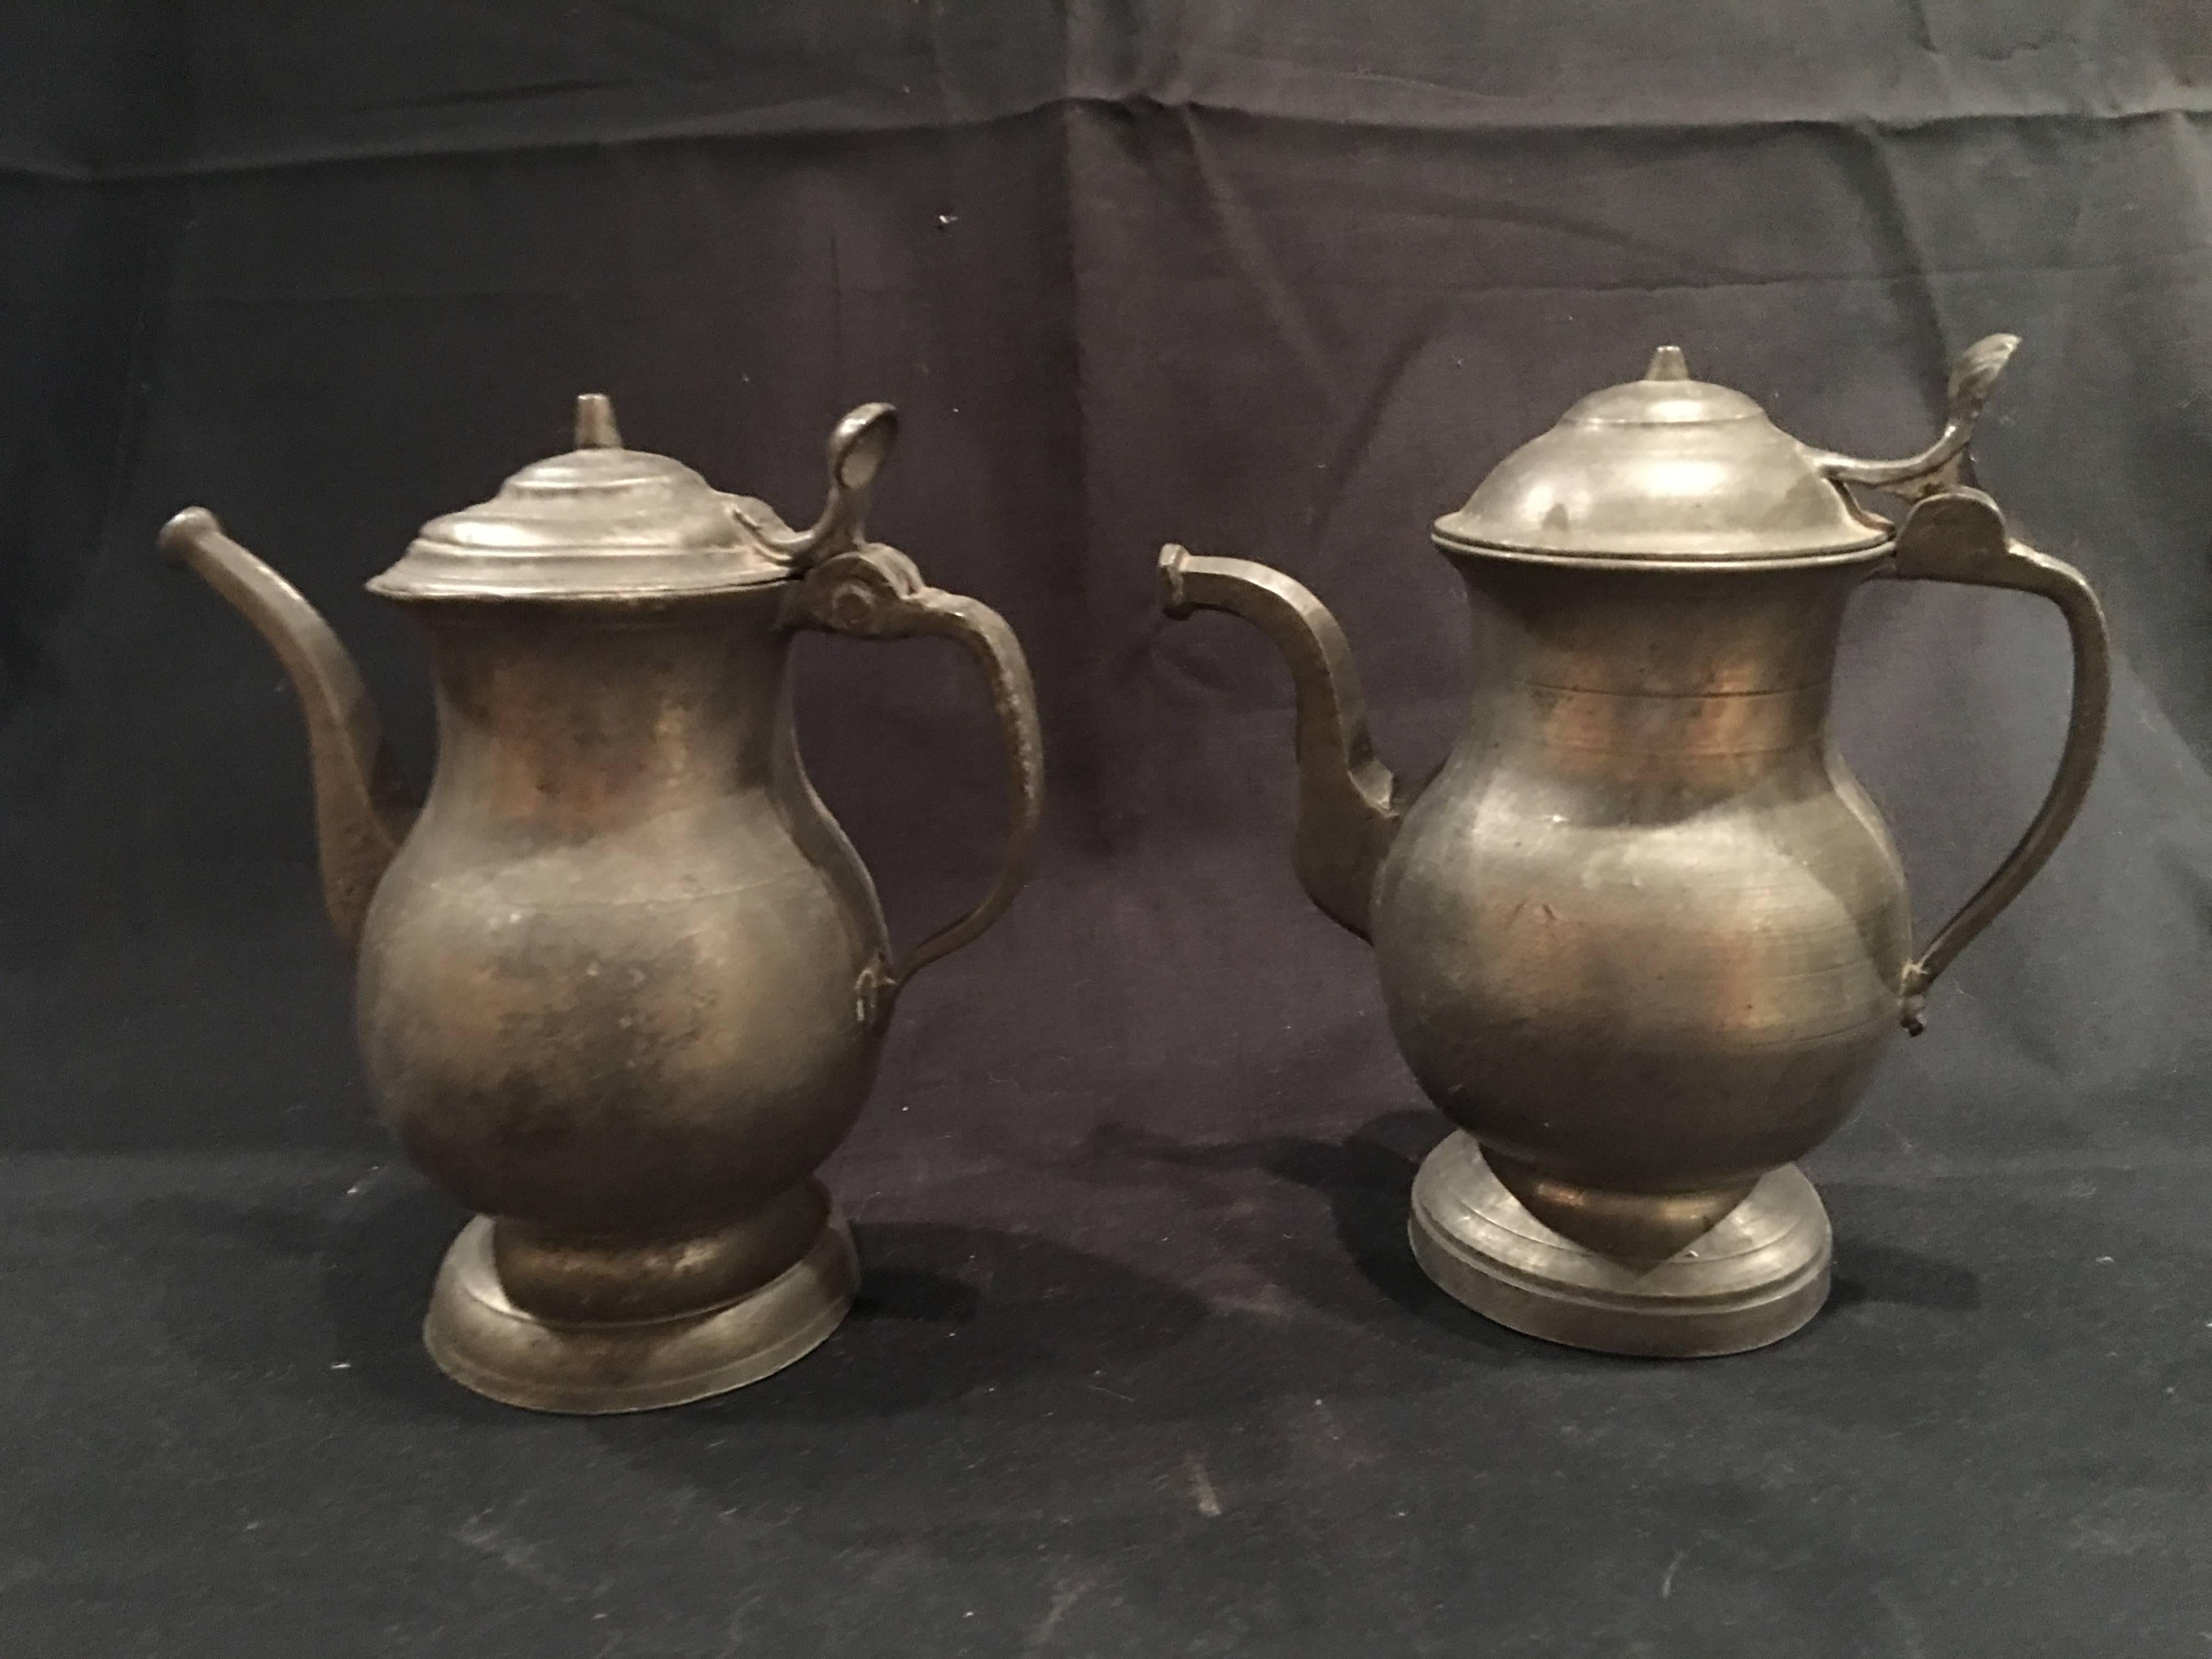 English pair of Pewter coffee pots, 19th century.